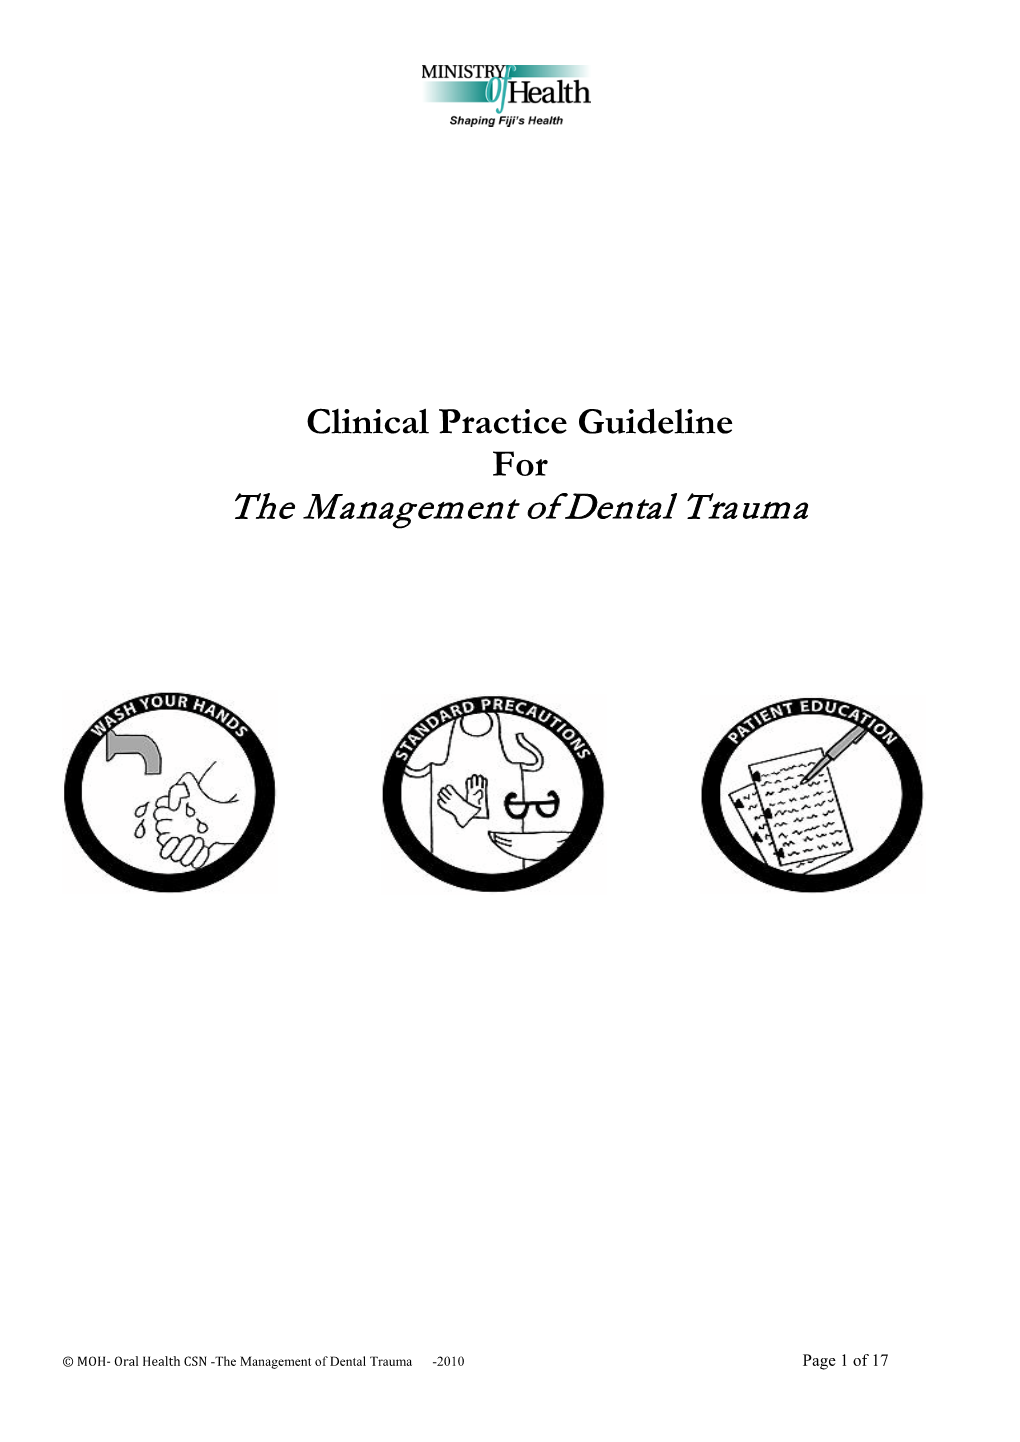 Clinical Practice Guideline for the Management of Dental Trauma